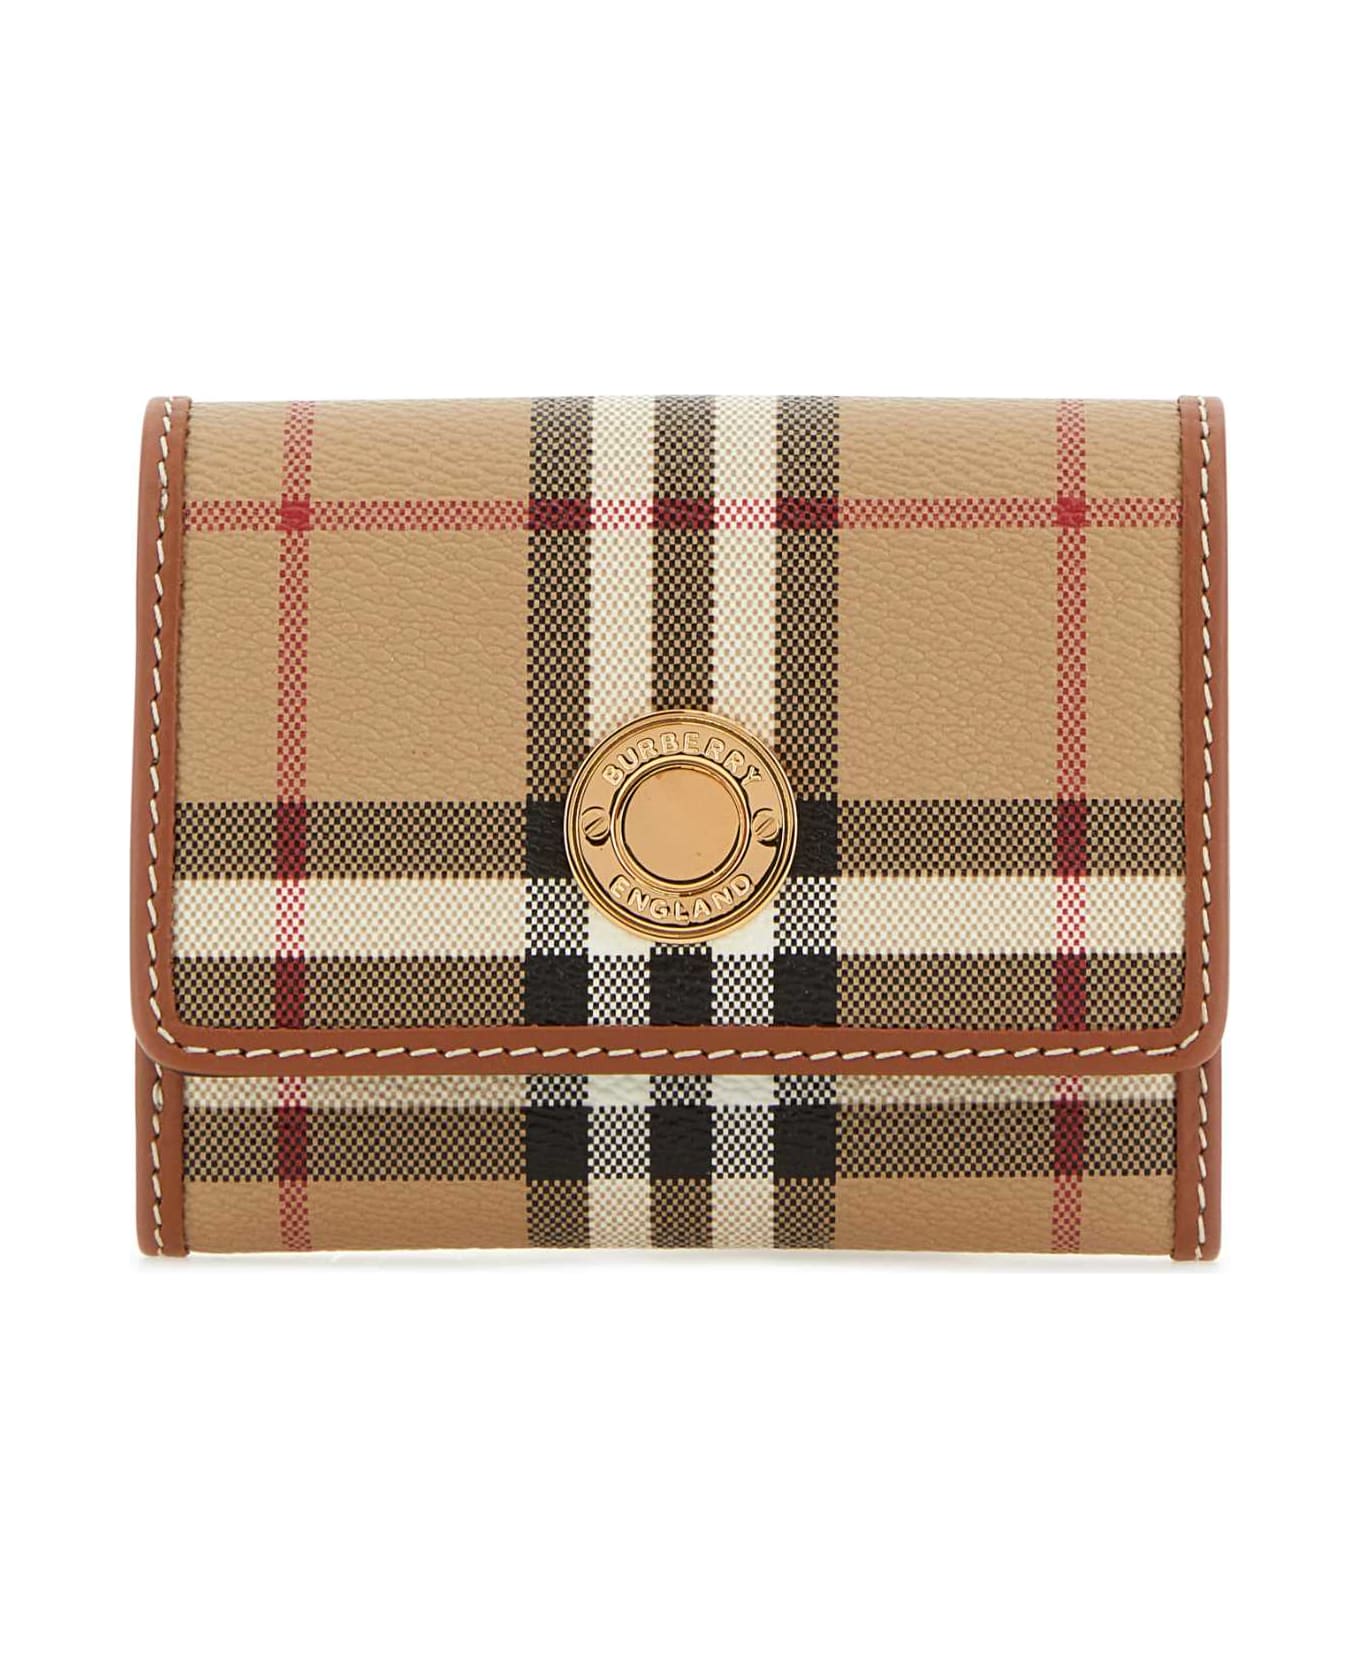 Burberry Printed Canvas And Leather Small Wallet - ARCHIVEBEIGE